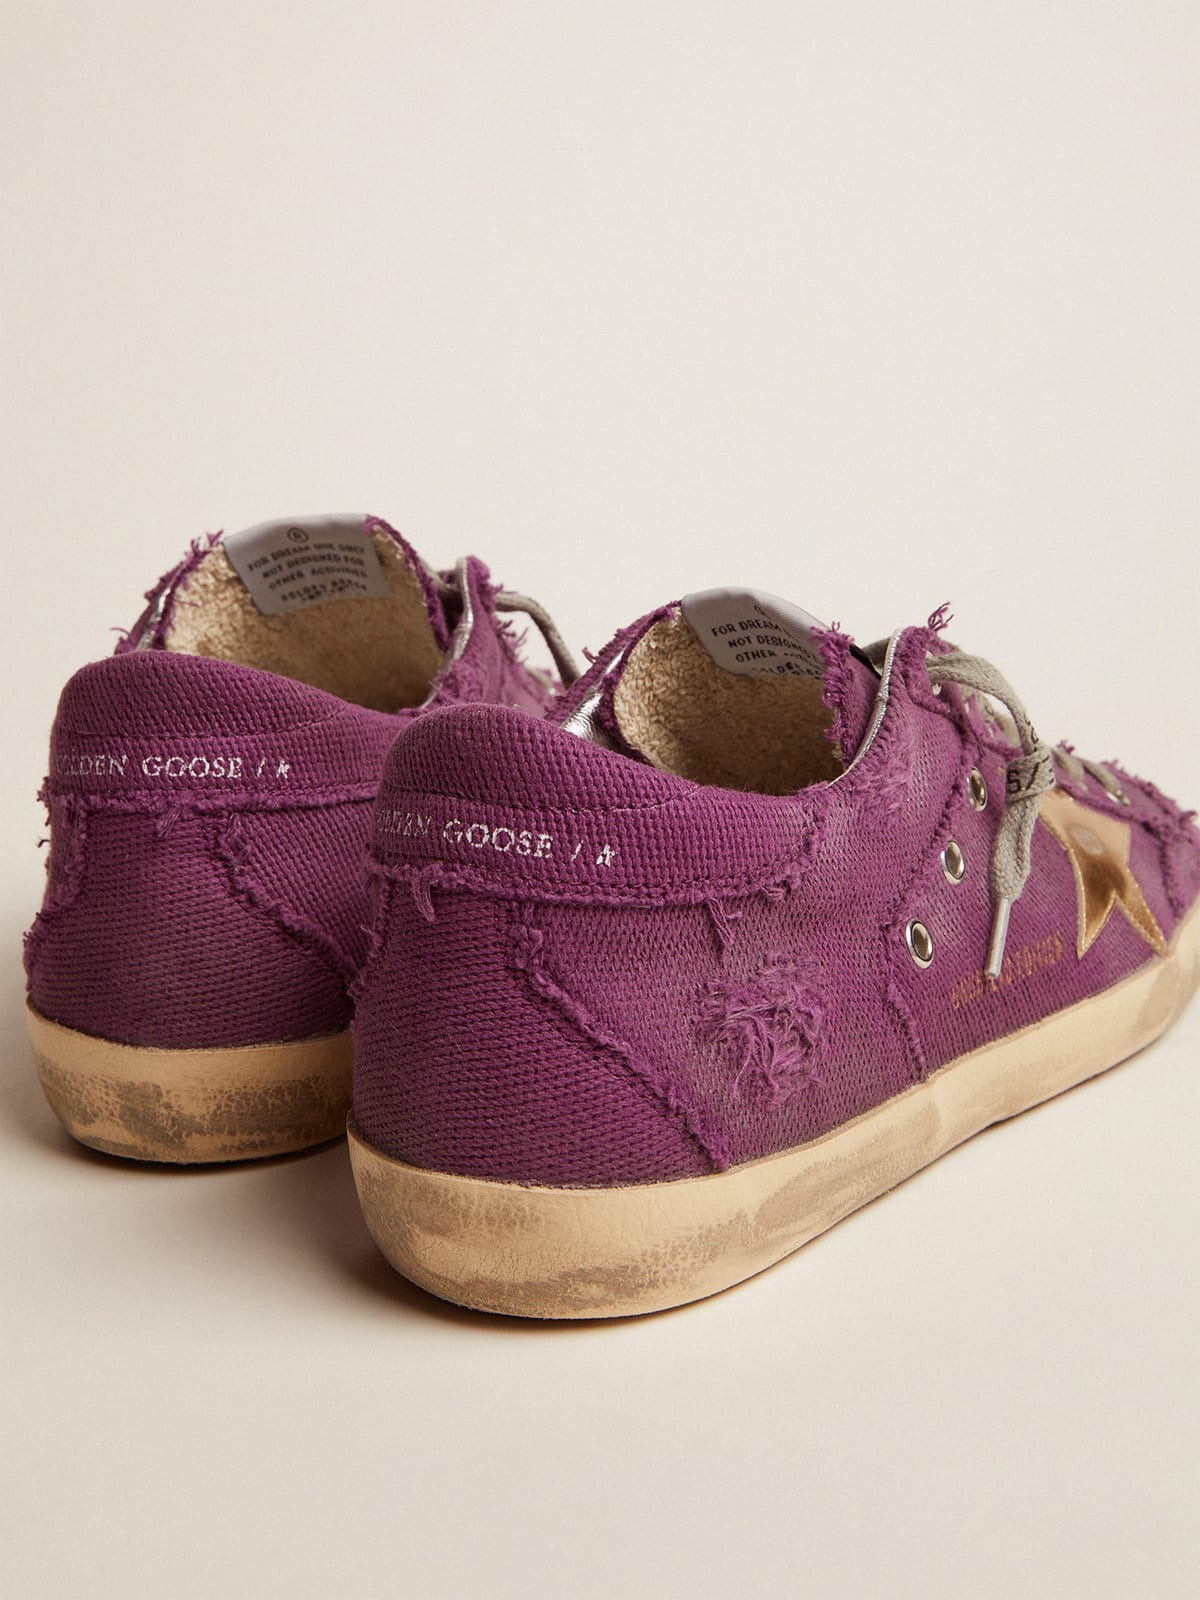 Golden Goose - Men’s Super-Star LAB sneakers in purple distressed canvas with gold star   in 